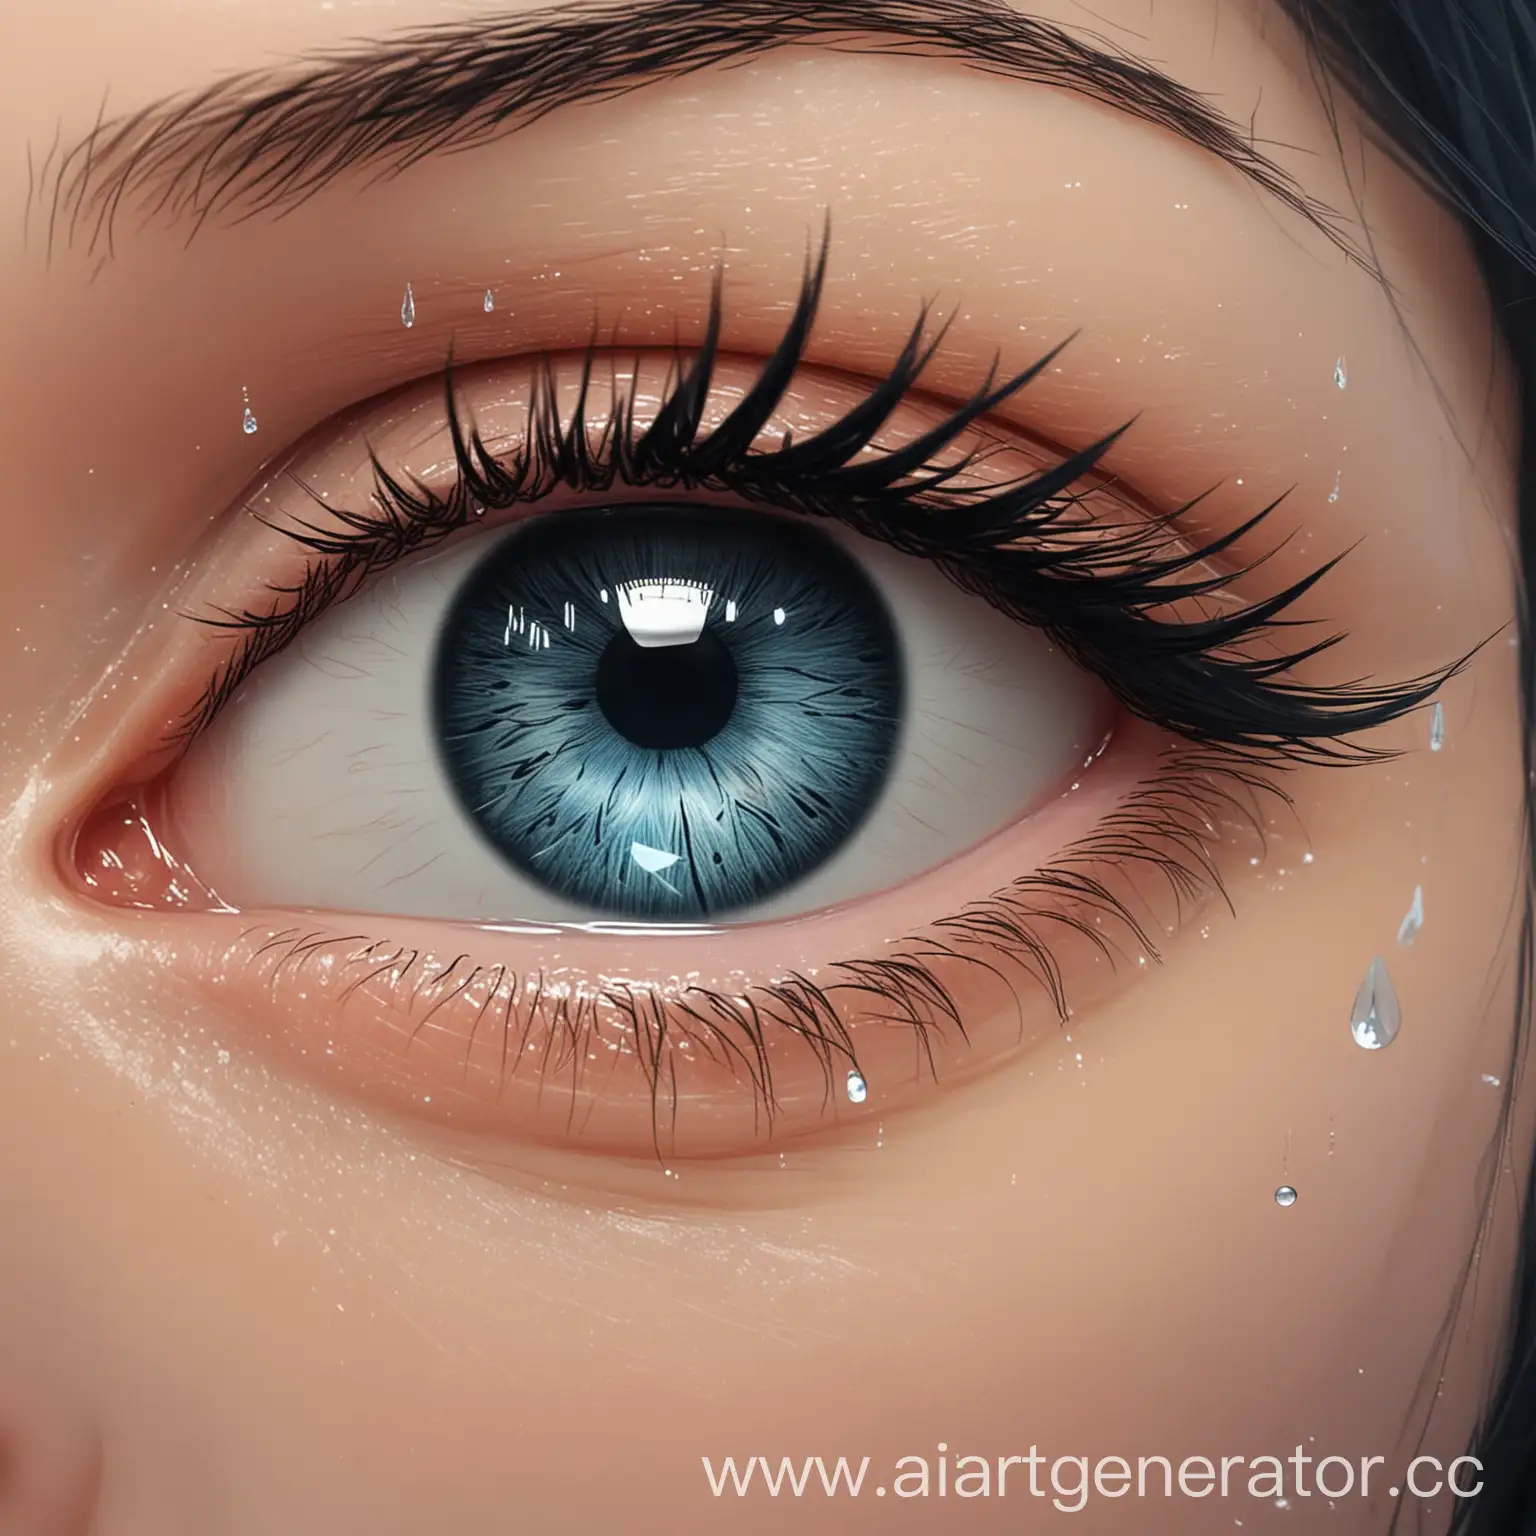 Draw an anime-style female eye with a small ship in the pupil and an ocean tear dripping logo